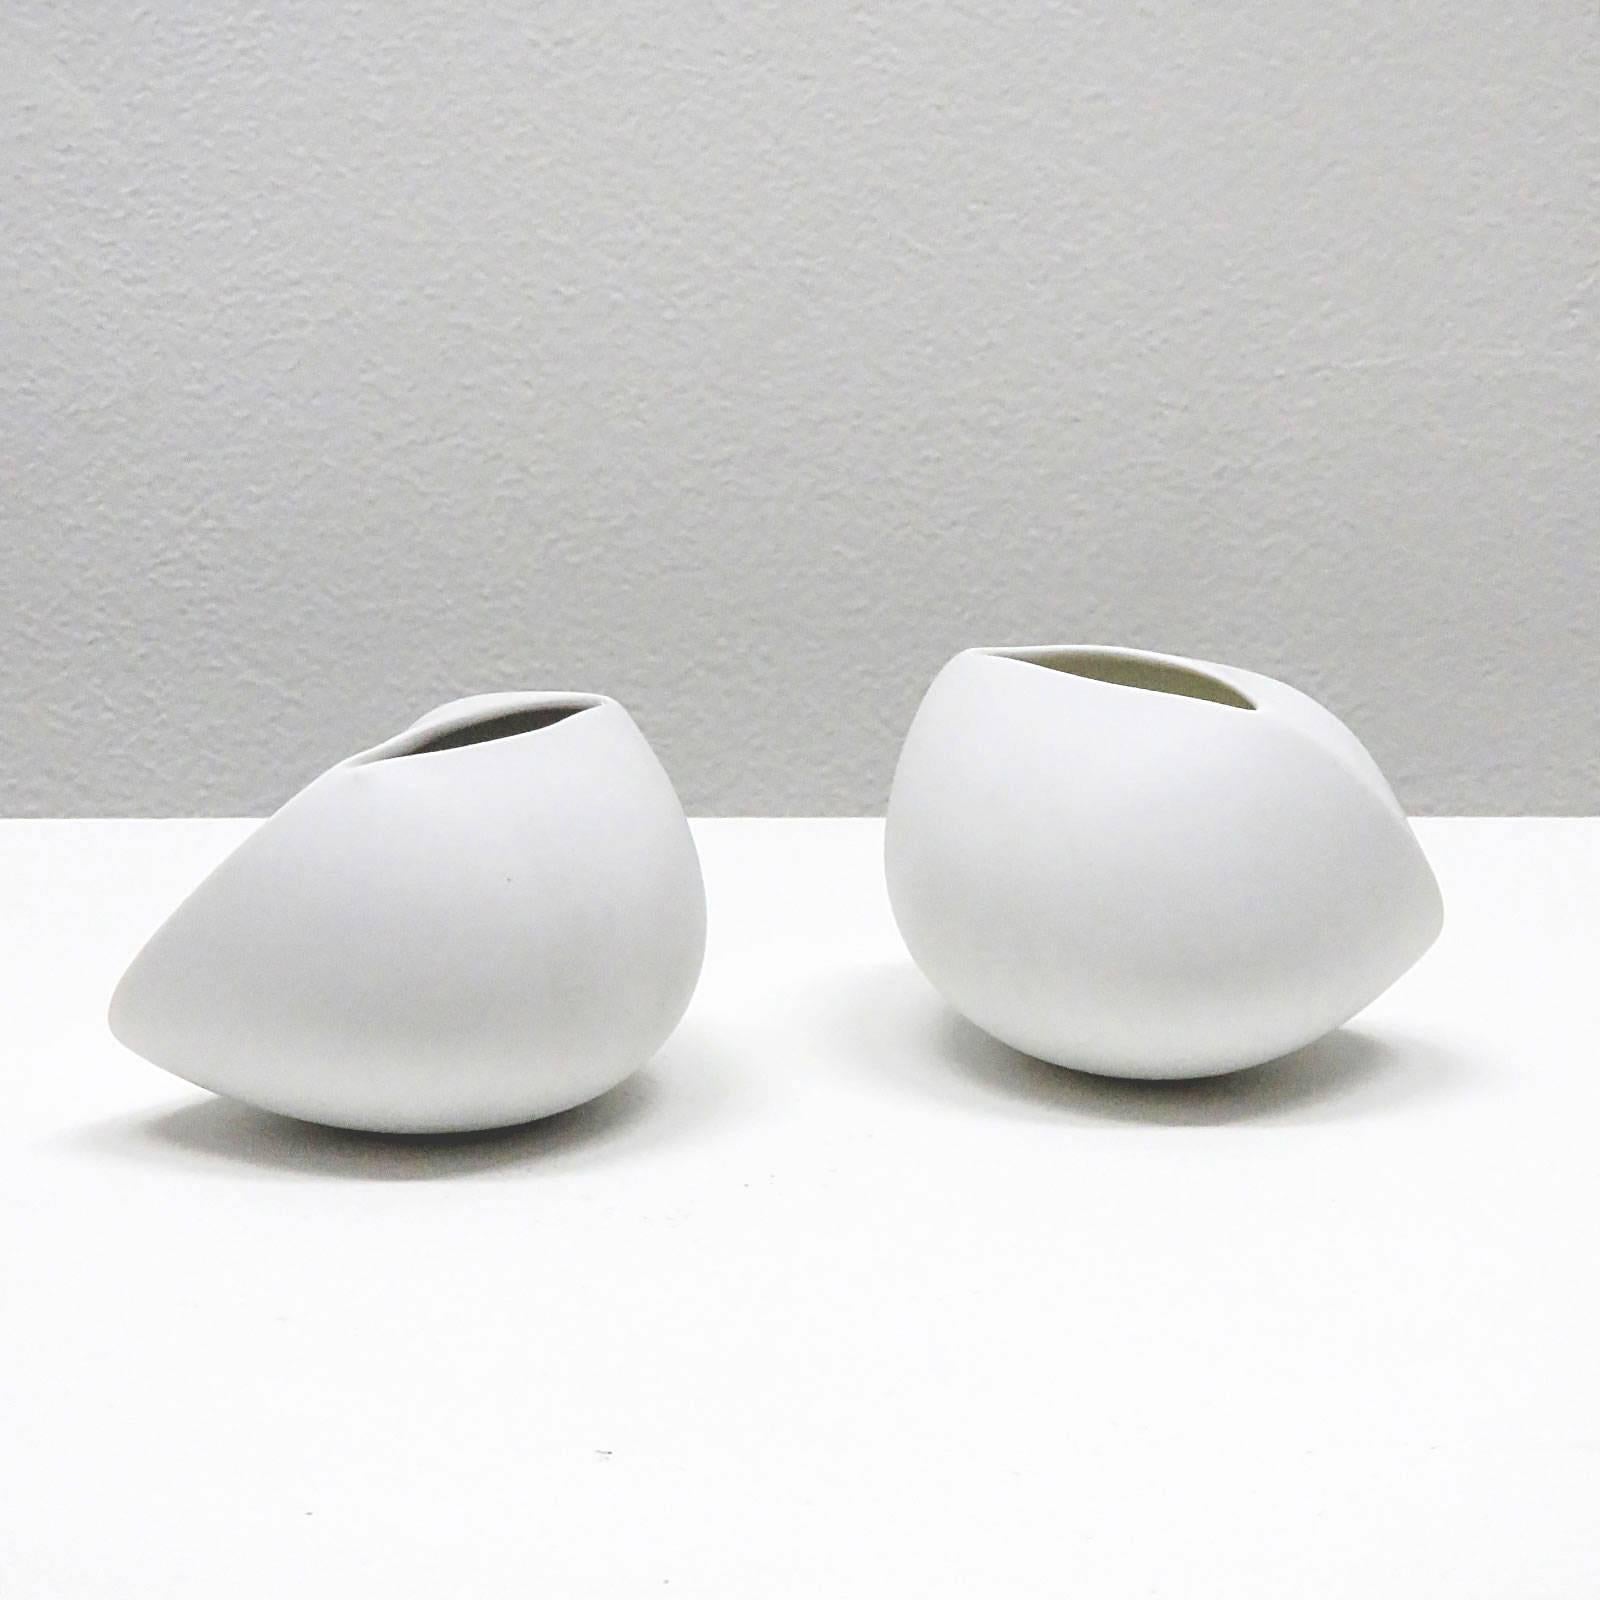 Pure white matte porcelain, organically shaped vases by Uta Feyl for Rosenthal, signed, priced as a pair.